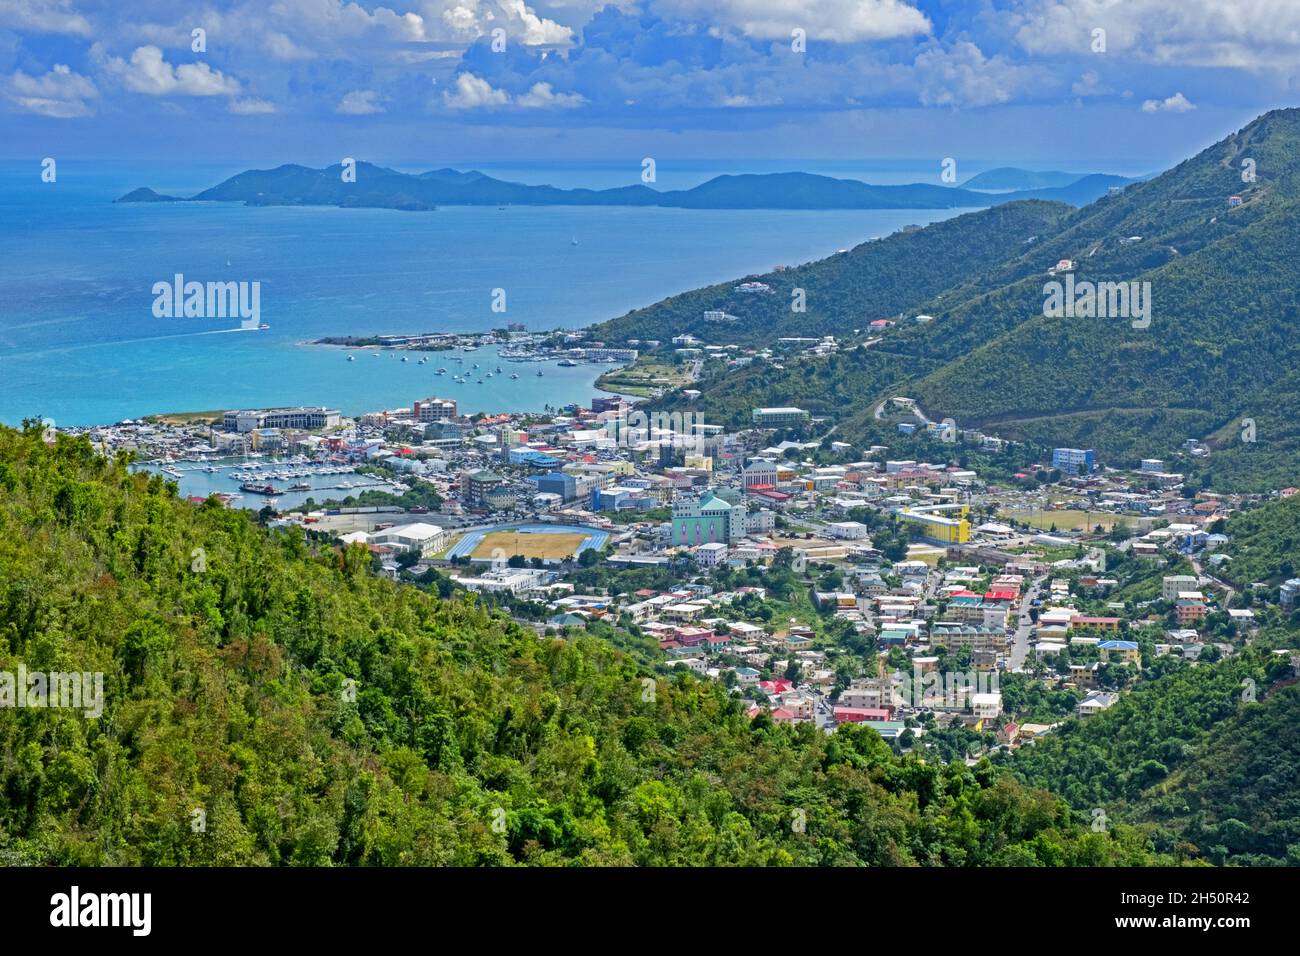 View over the capital city Road Town and horseshoe-shaped Road Harbour on the island Tortola, British Virgin Islands, Lesser Antilles, Caribbean Sea Stock Photo